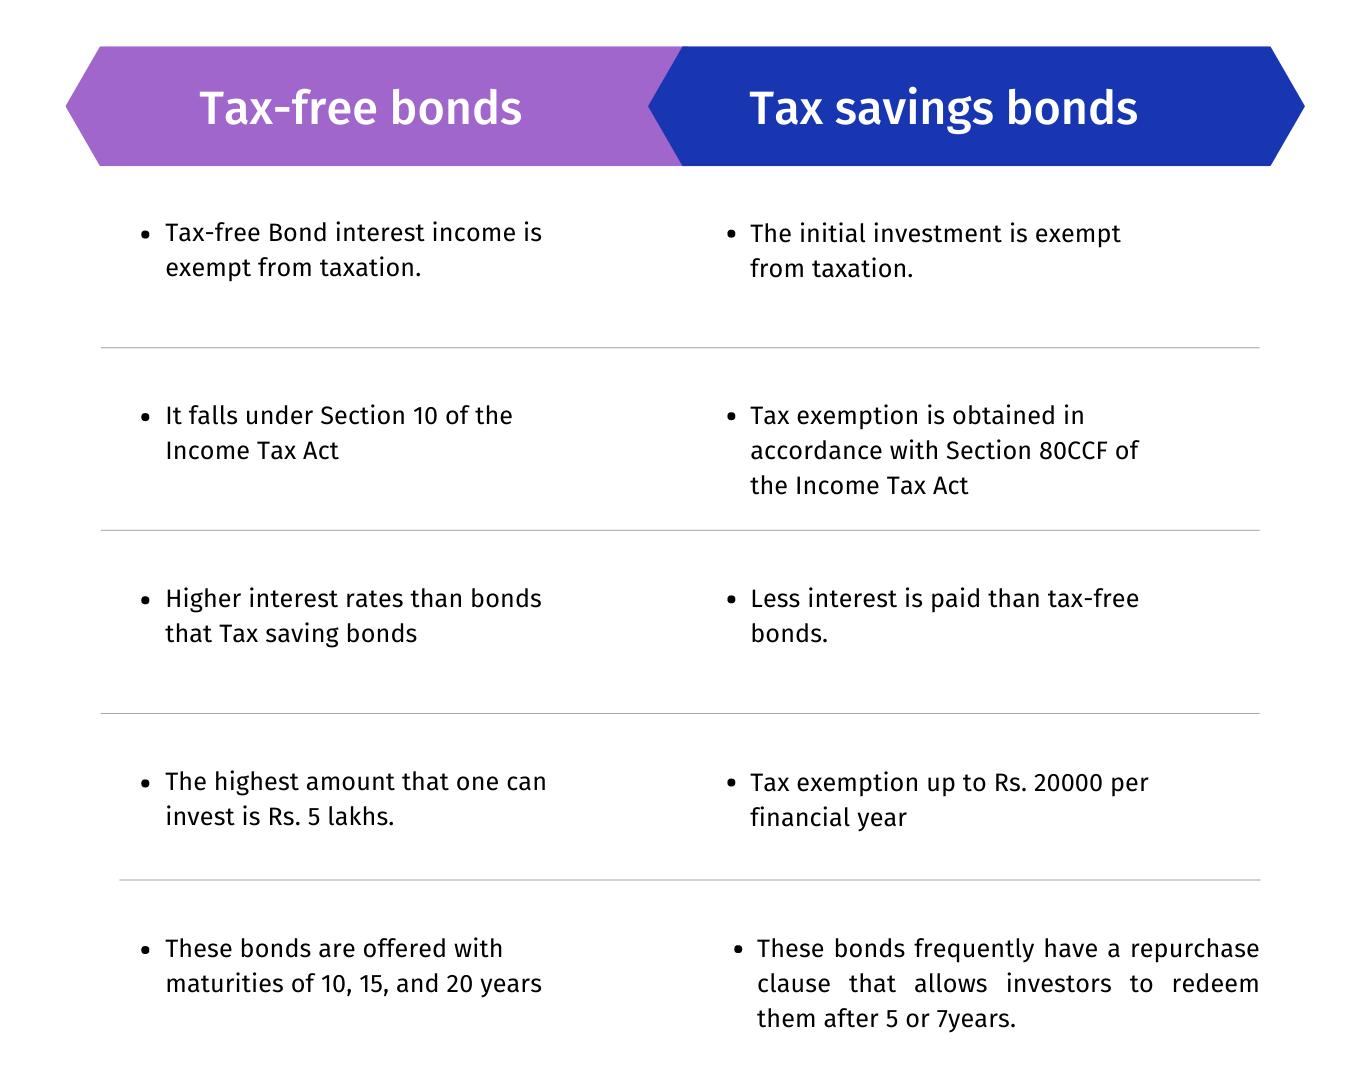 What is the difference between taxfree bonds and taxsaving bonds